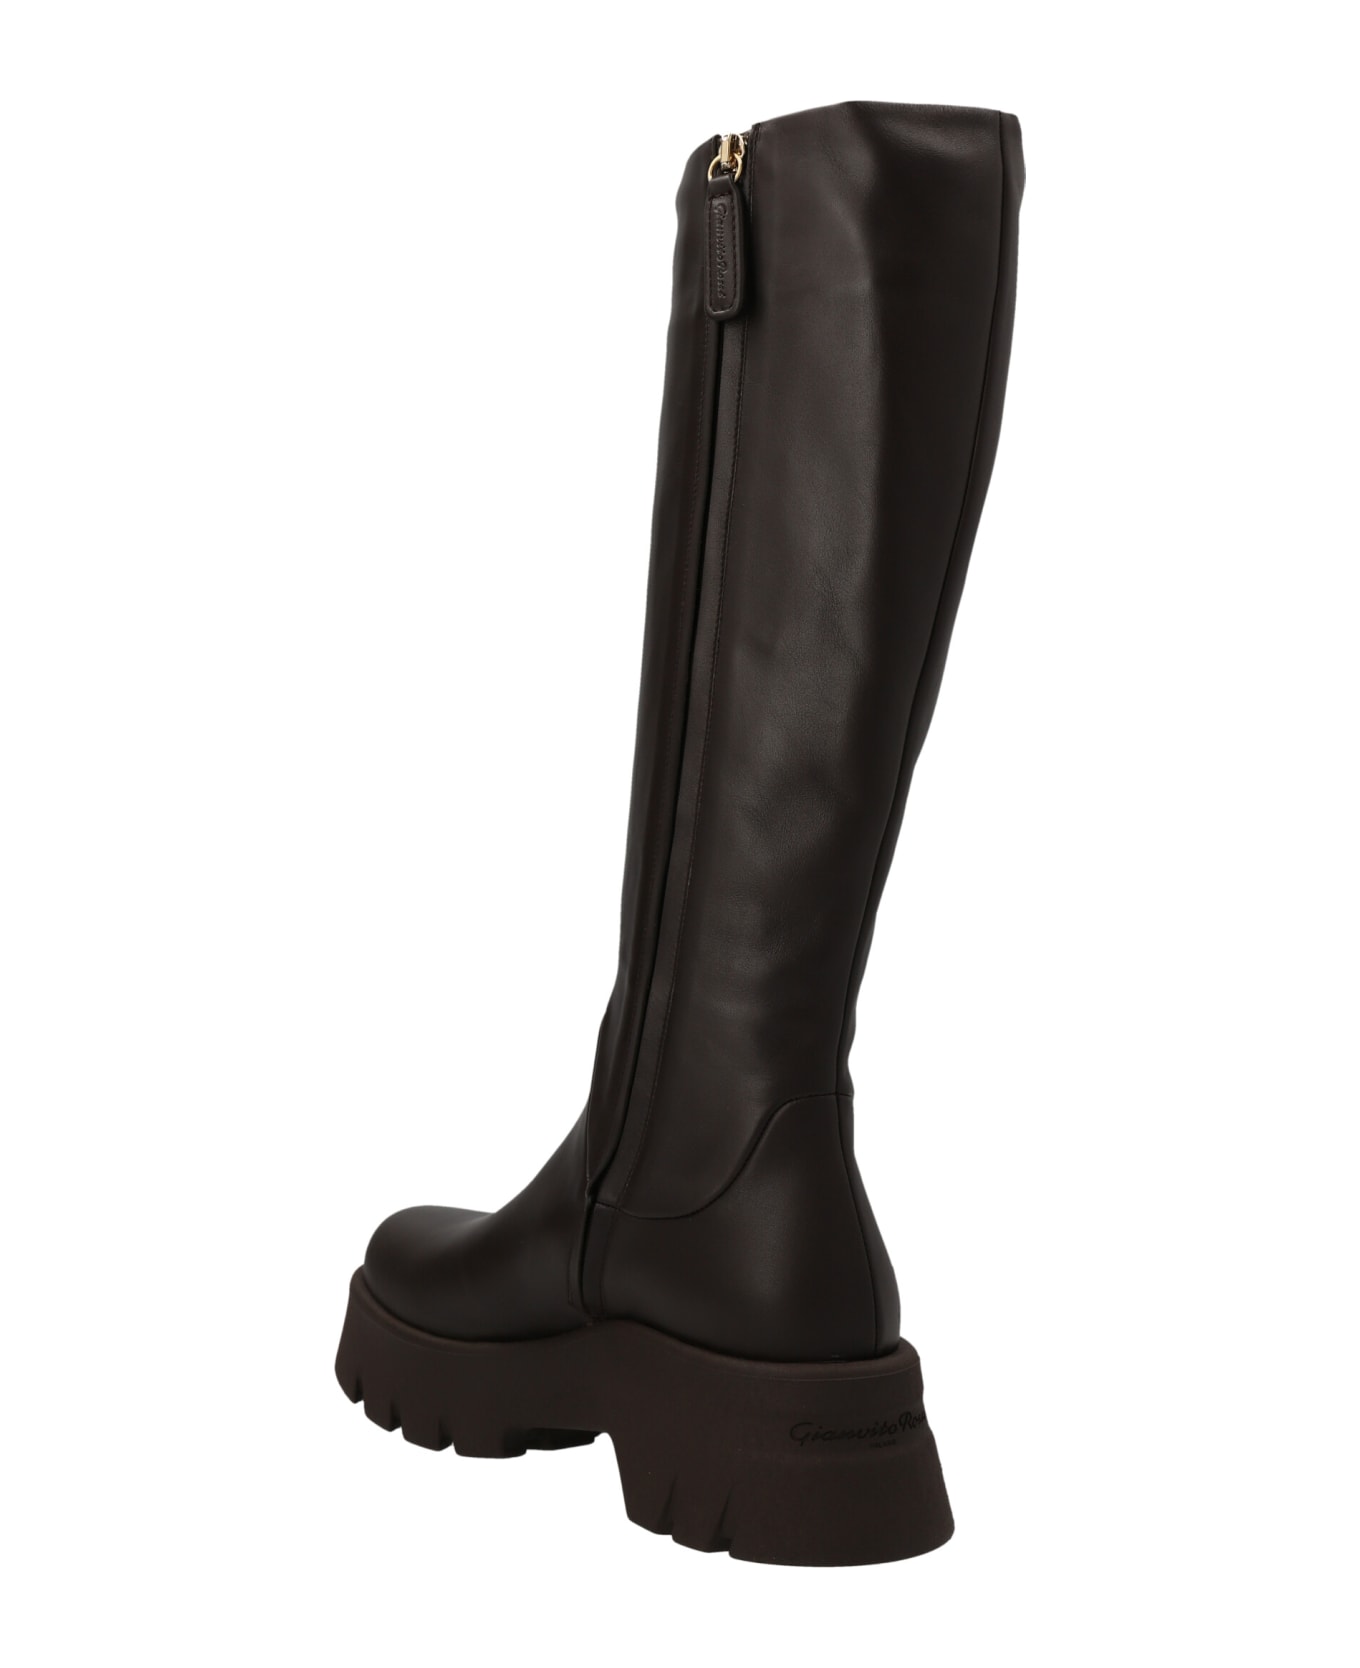 Gianvito Rossi 'montey' Boots - Brown